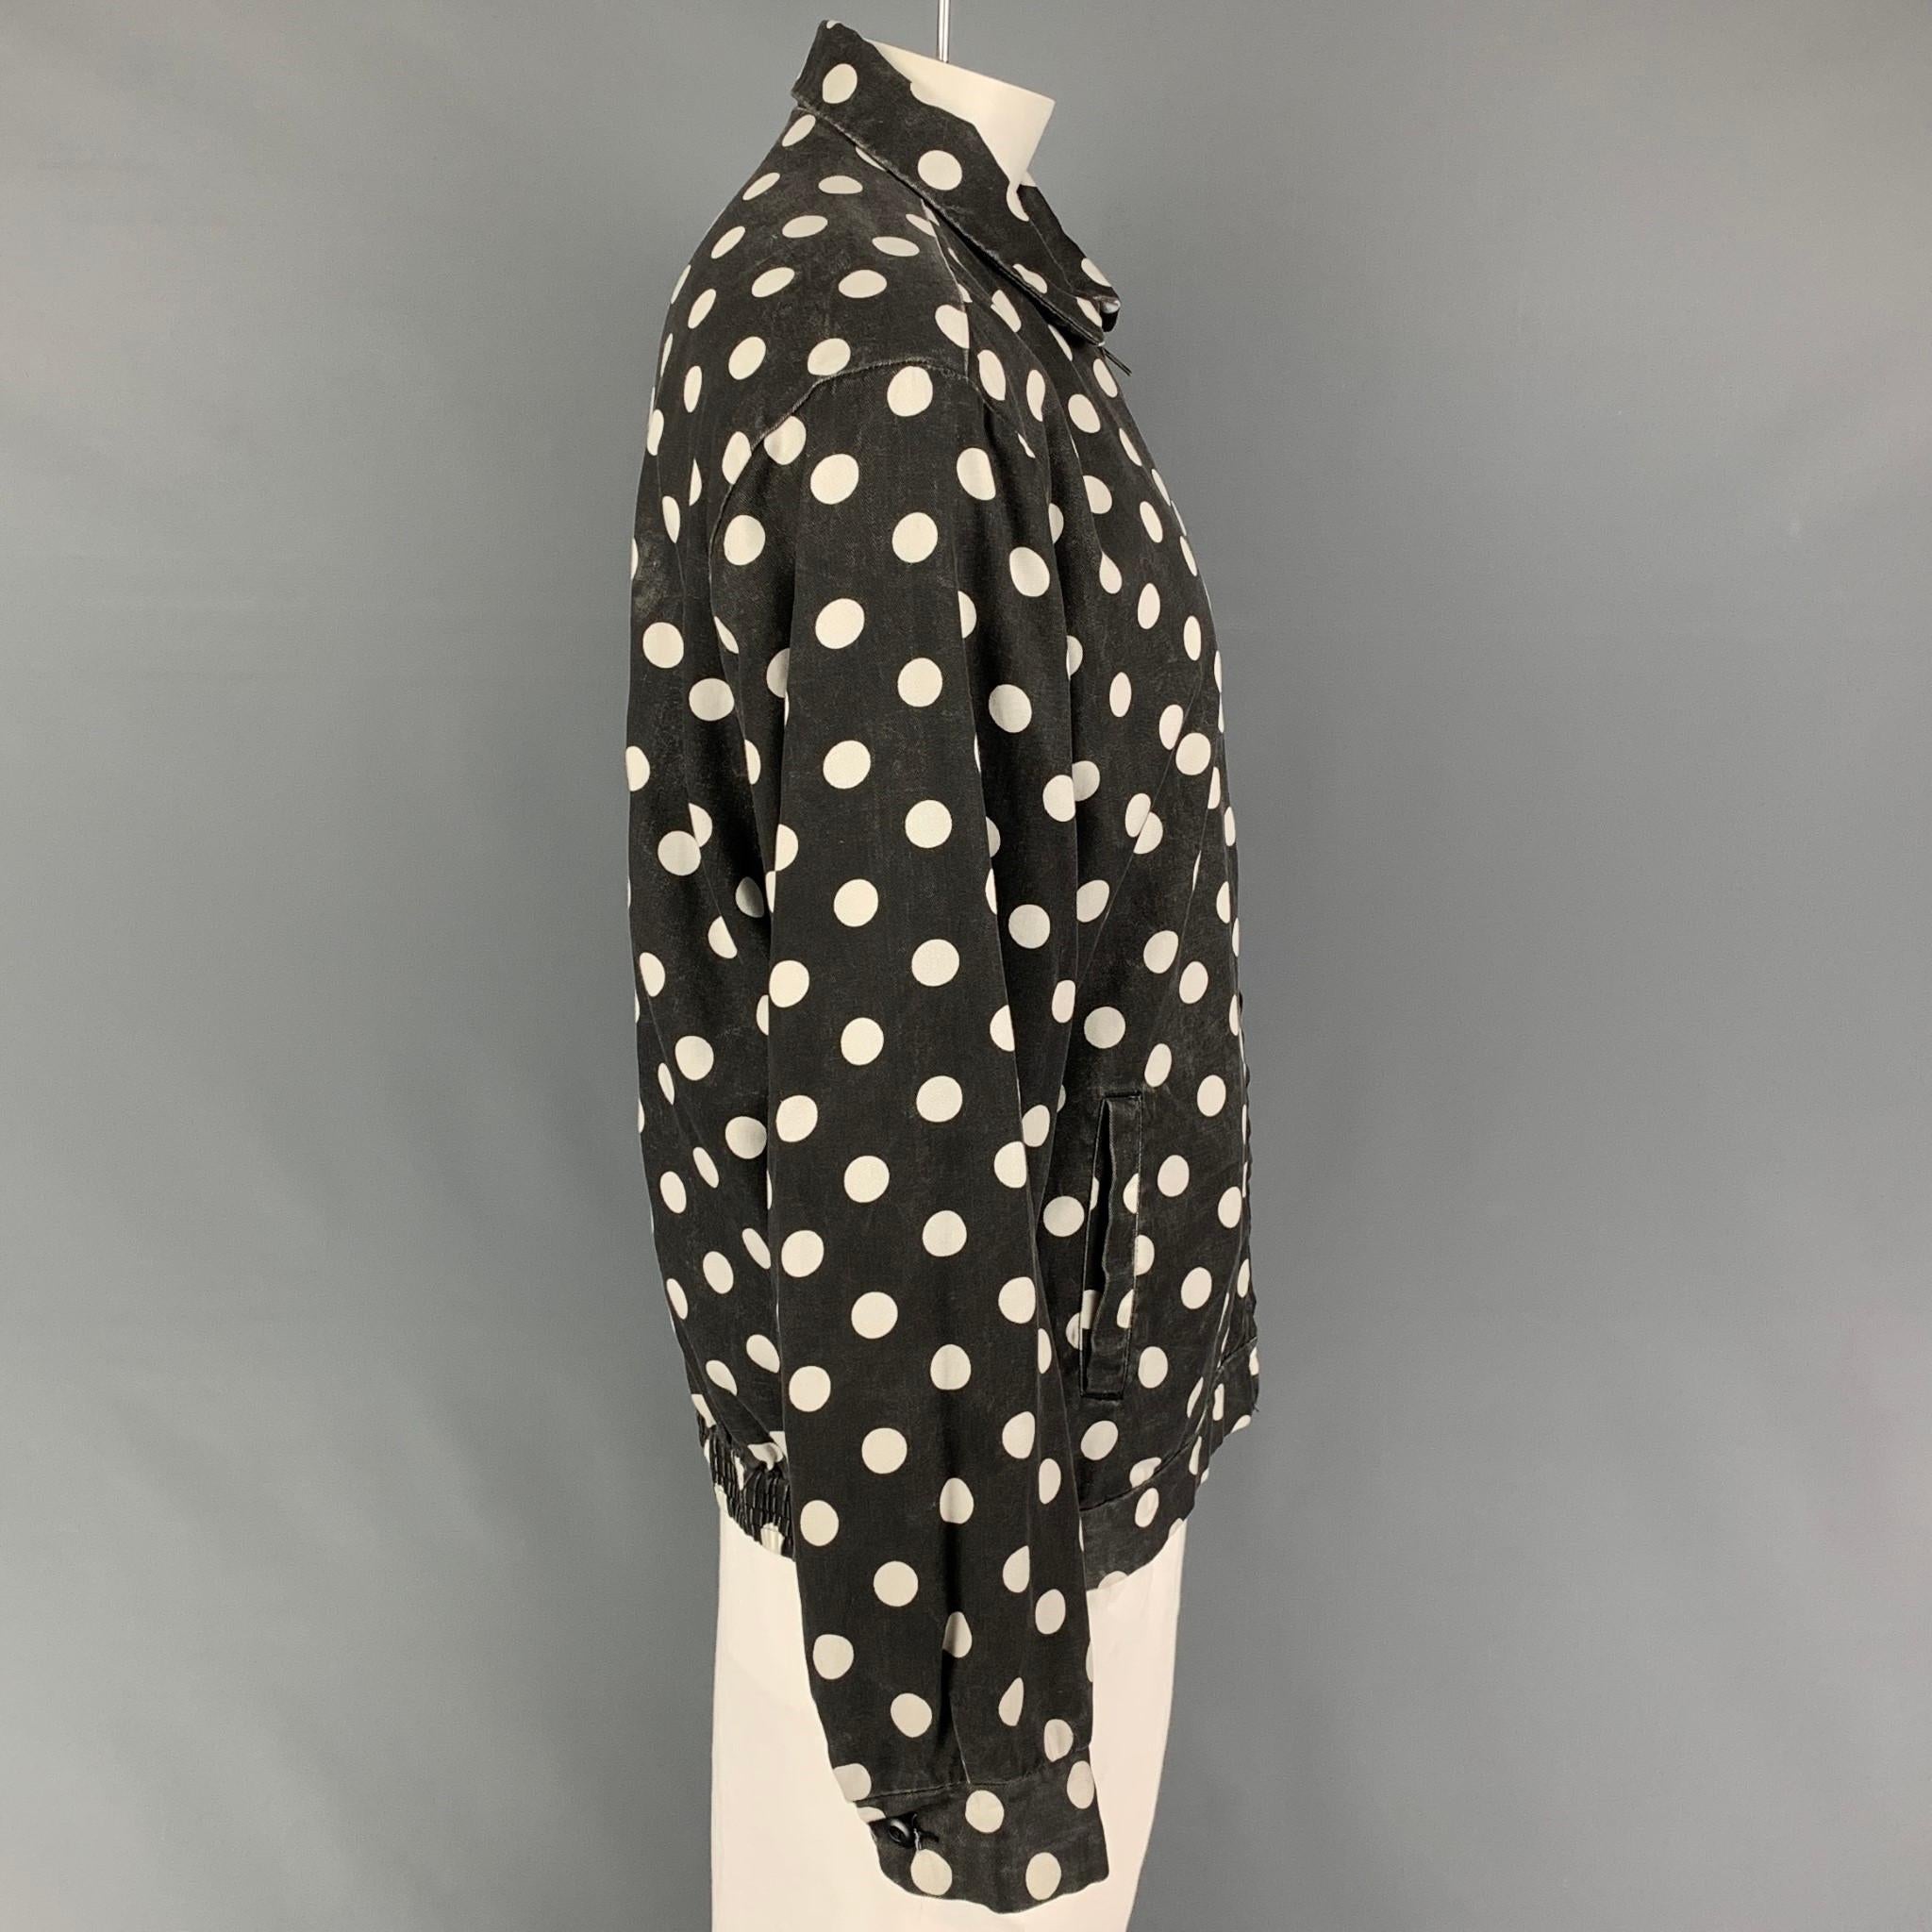 SUPREME jacket comes in a black & white polka dot rayon featuring a spread collar, back elastic trim, slit pockets, and a full zip up closure. 

Good Pre-Owned Condition. Light mark at front. As-Is.
Marked: XL

Measurements:

Shoulder: 21.5